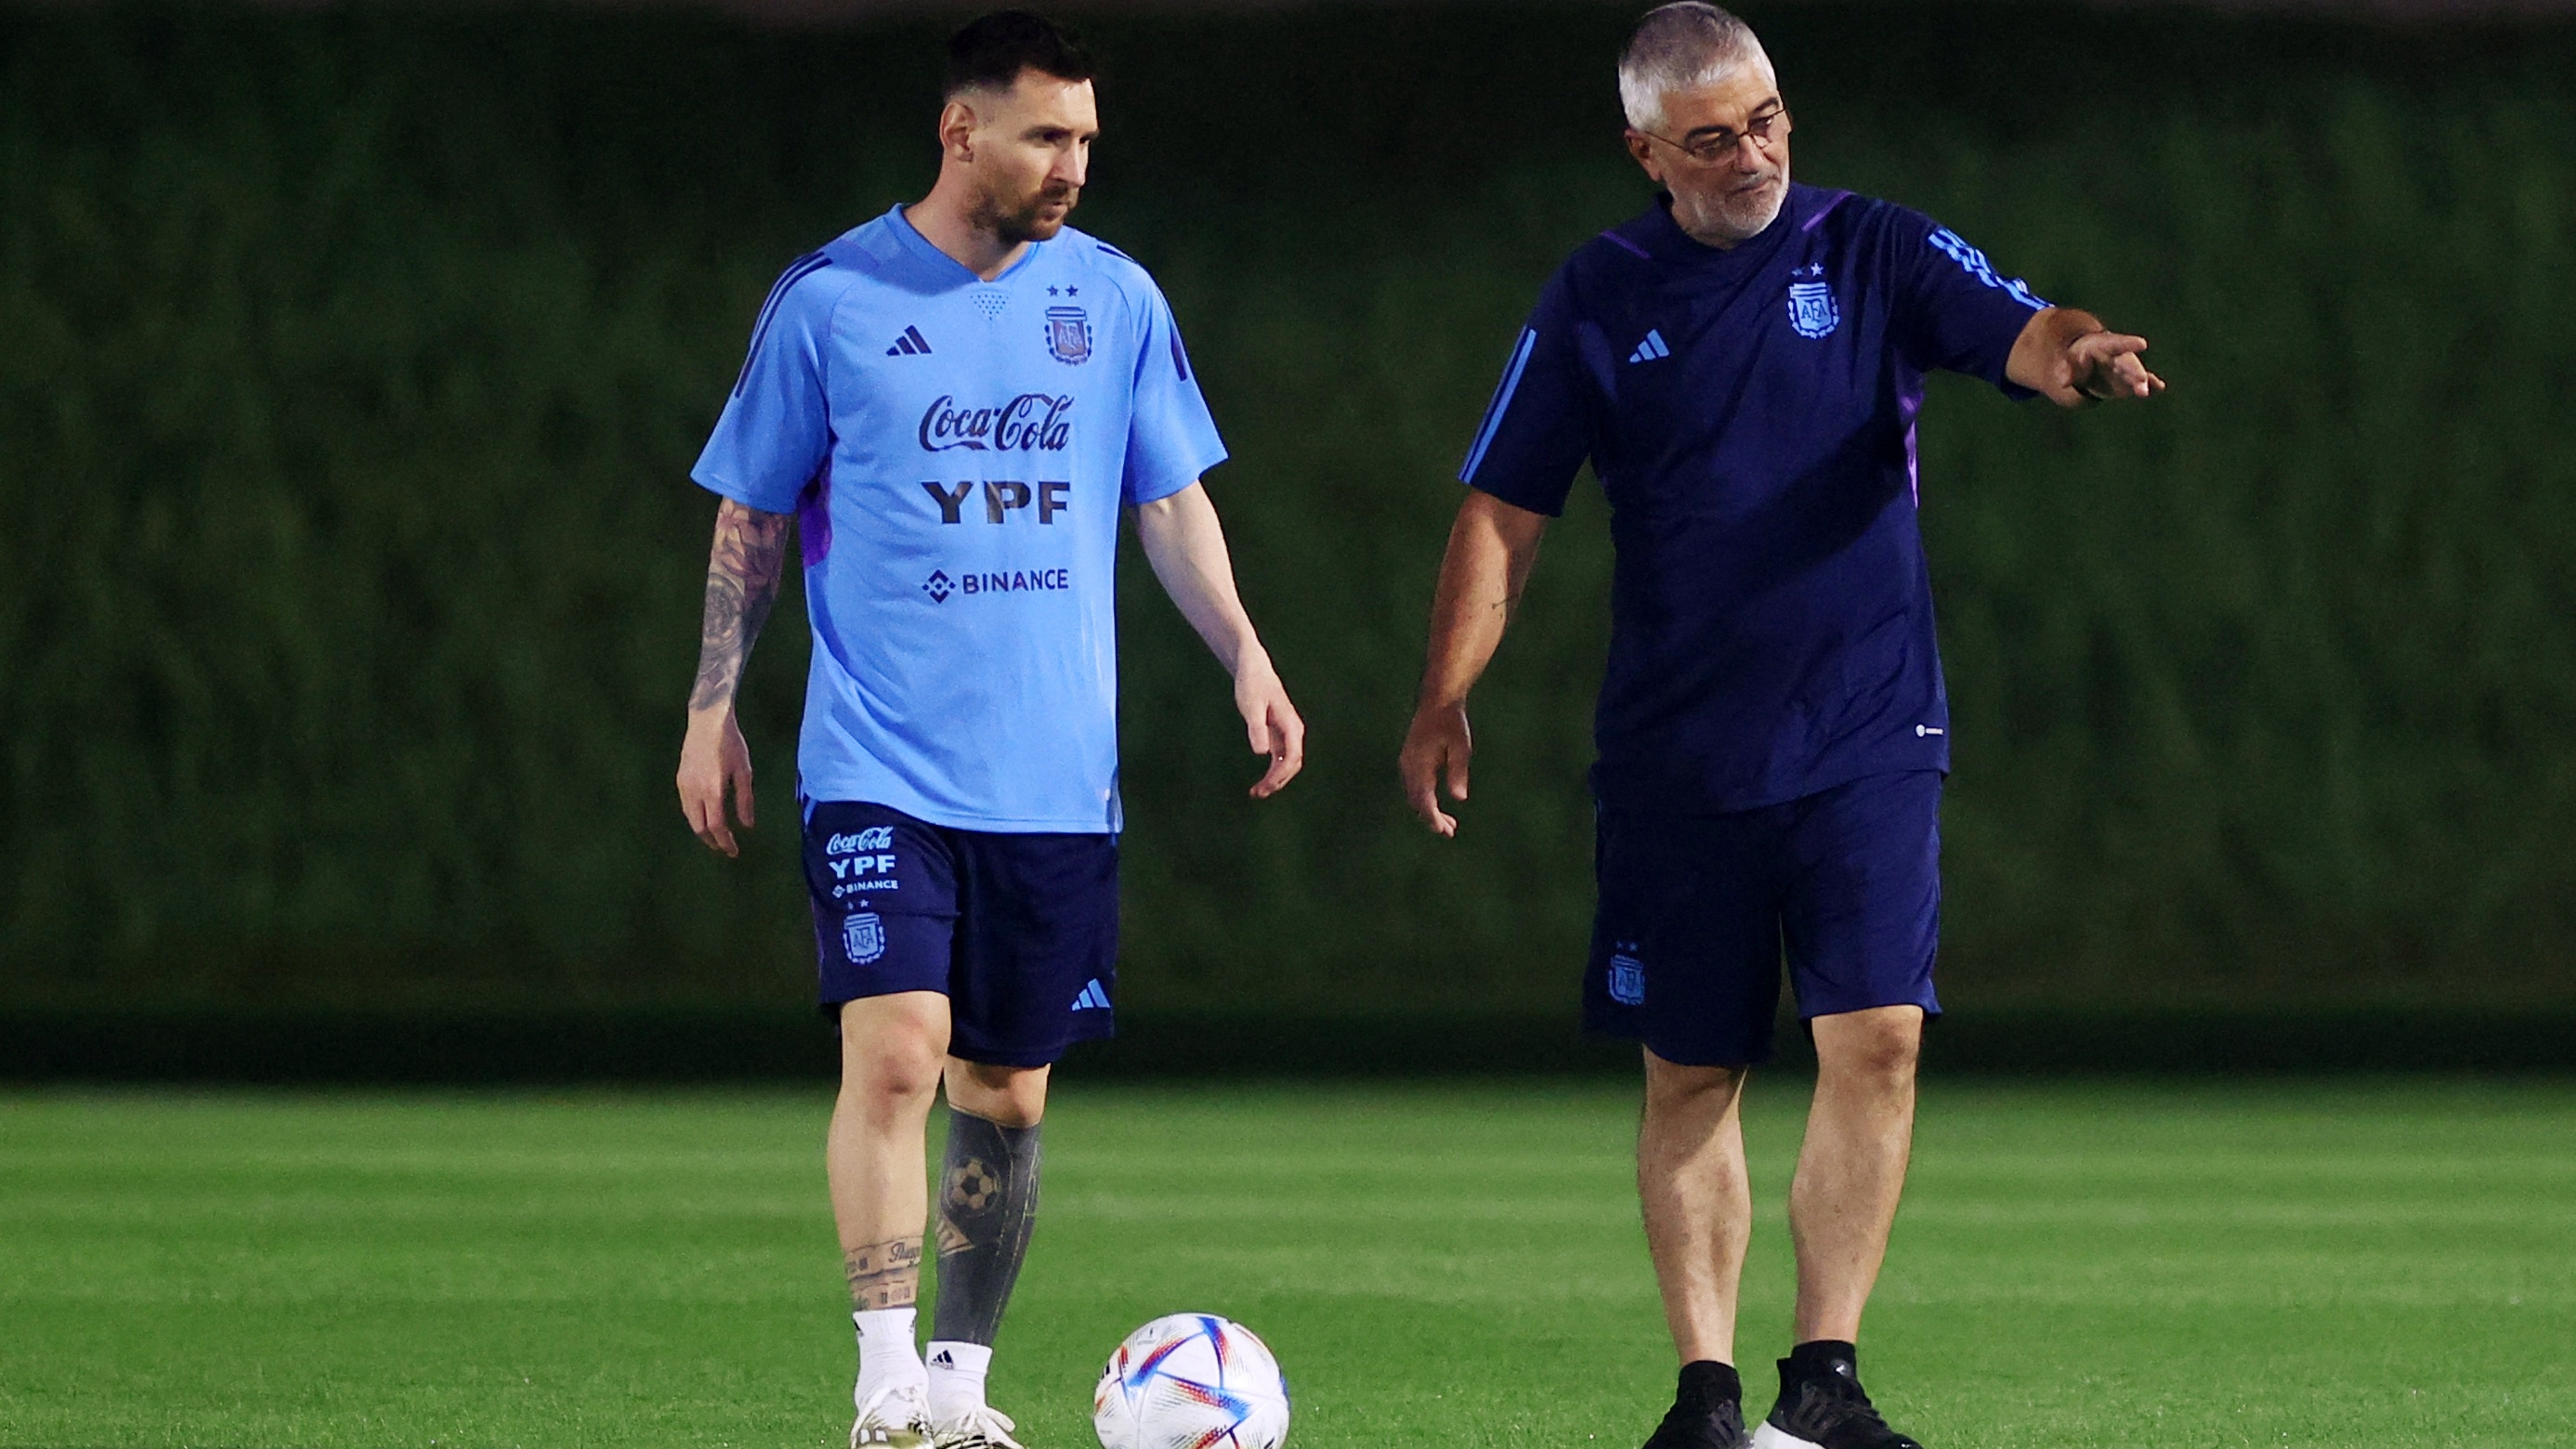 Lionel Messi trained differently with physical preparation (REUTERS/Kai Pfaffenbach)